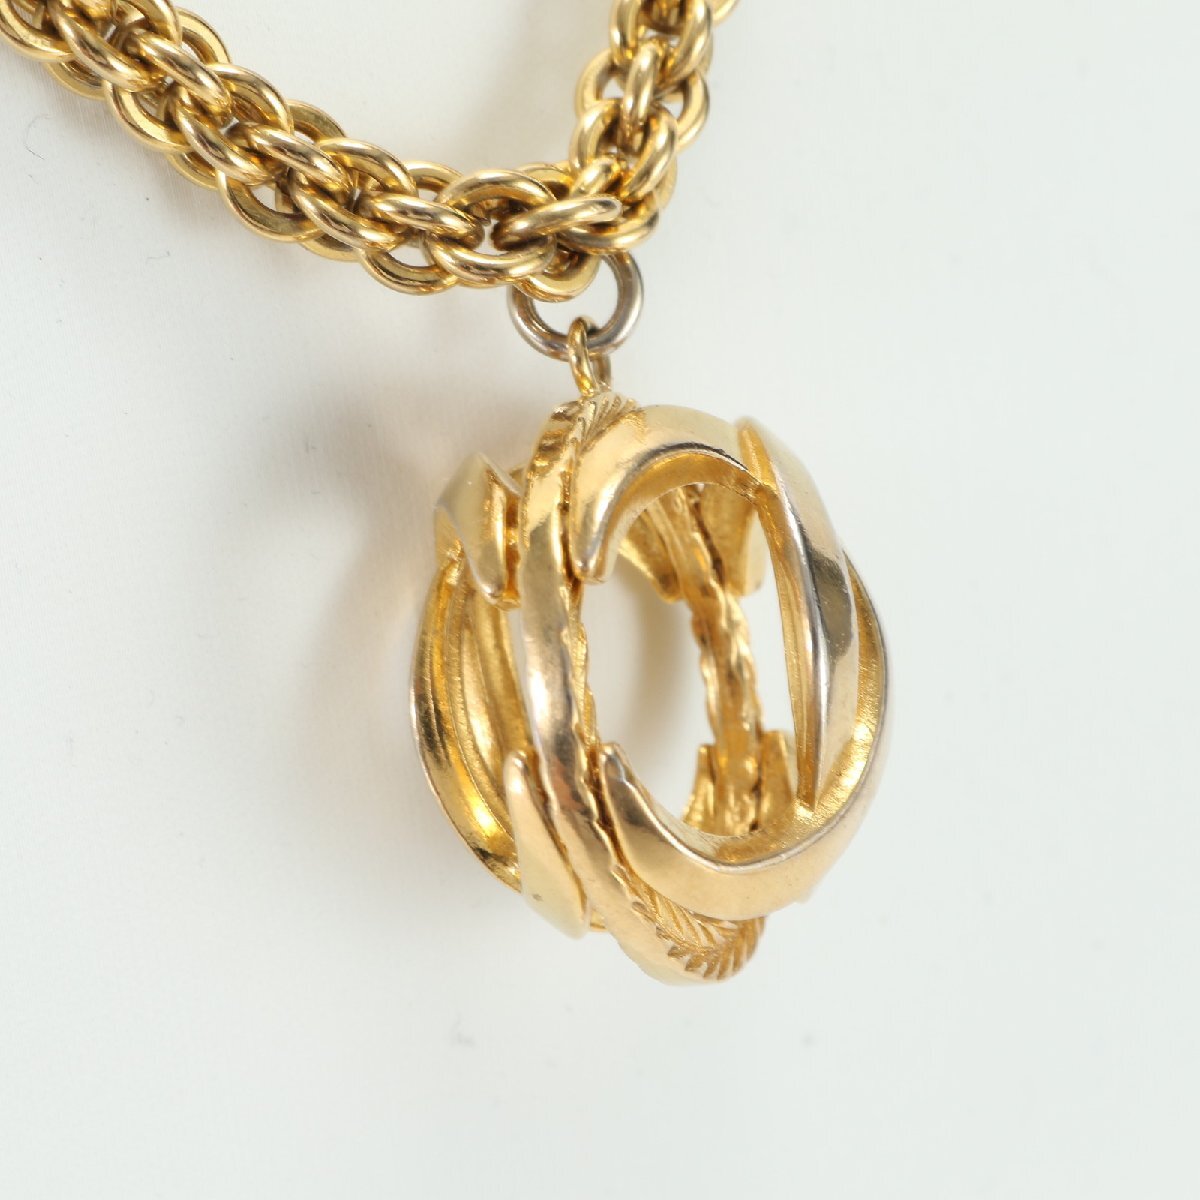 1 jpy # beautiful goods # Vintage # Chanel # here Mark chain lamp body accessory necklace Gold lady's men's MHM J6-5